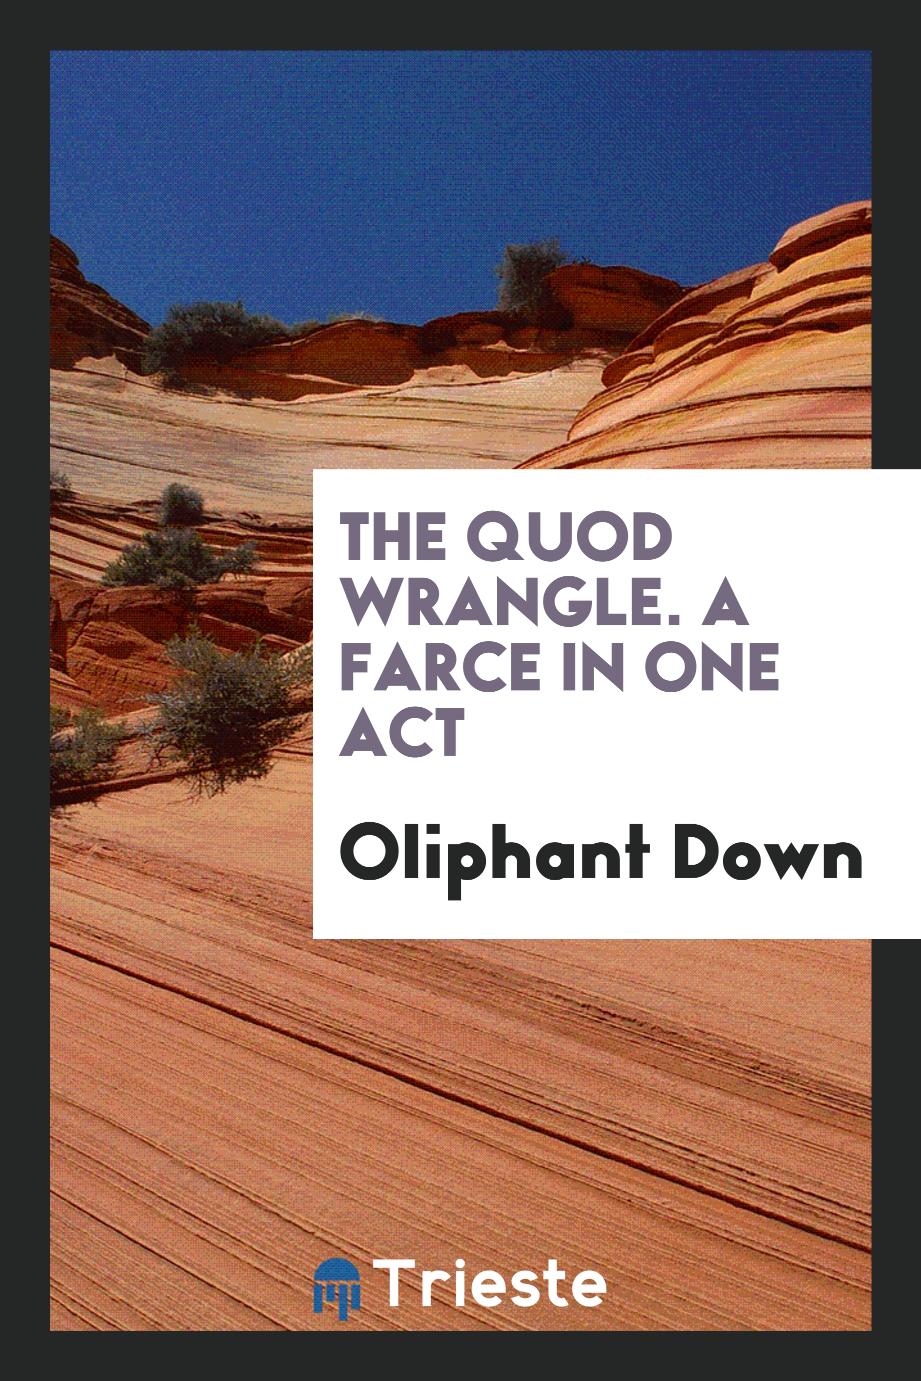 Oliphant Down - The Quod Wrangle. A Farce in One Act